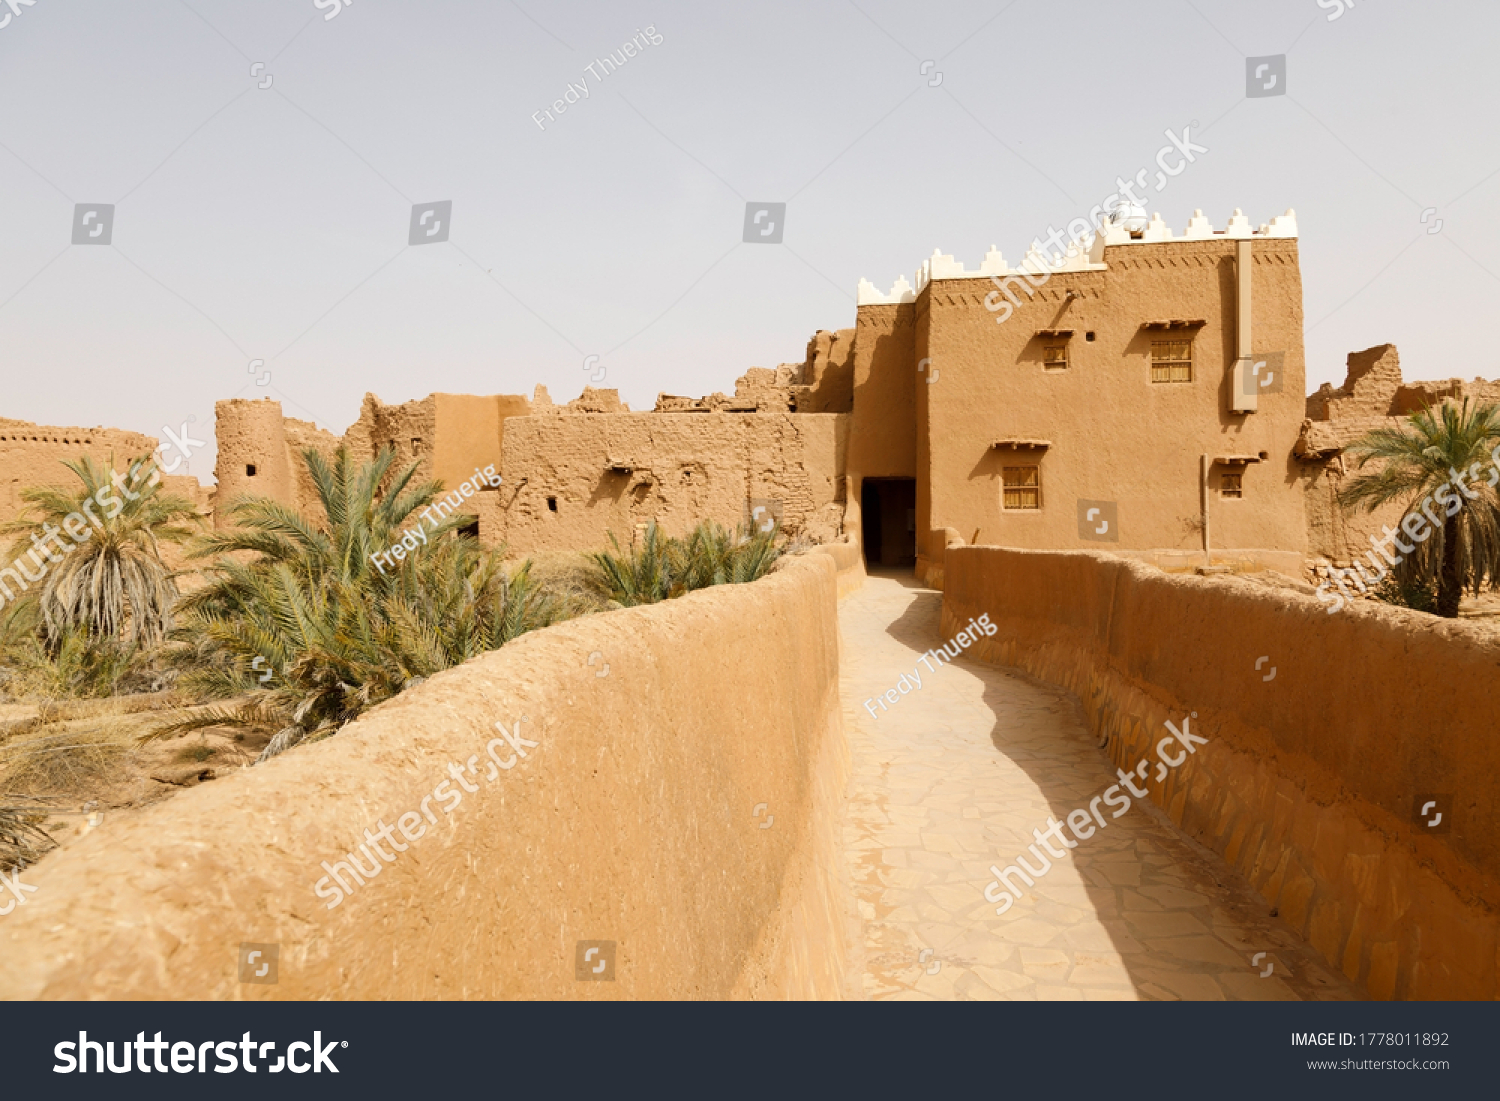 Ushaiger, Ar Riyadh in Saudi Arabia. A traditional restored village made of clay bricks. Ushaiger is one of the Heritage Villages in the Kingdom of Saudi Arabia #1778011892